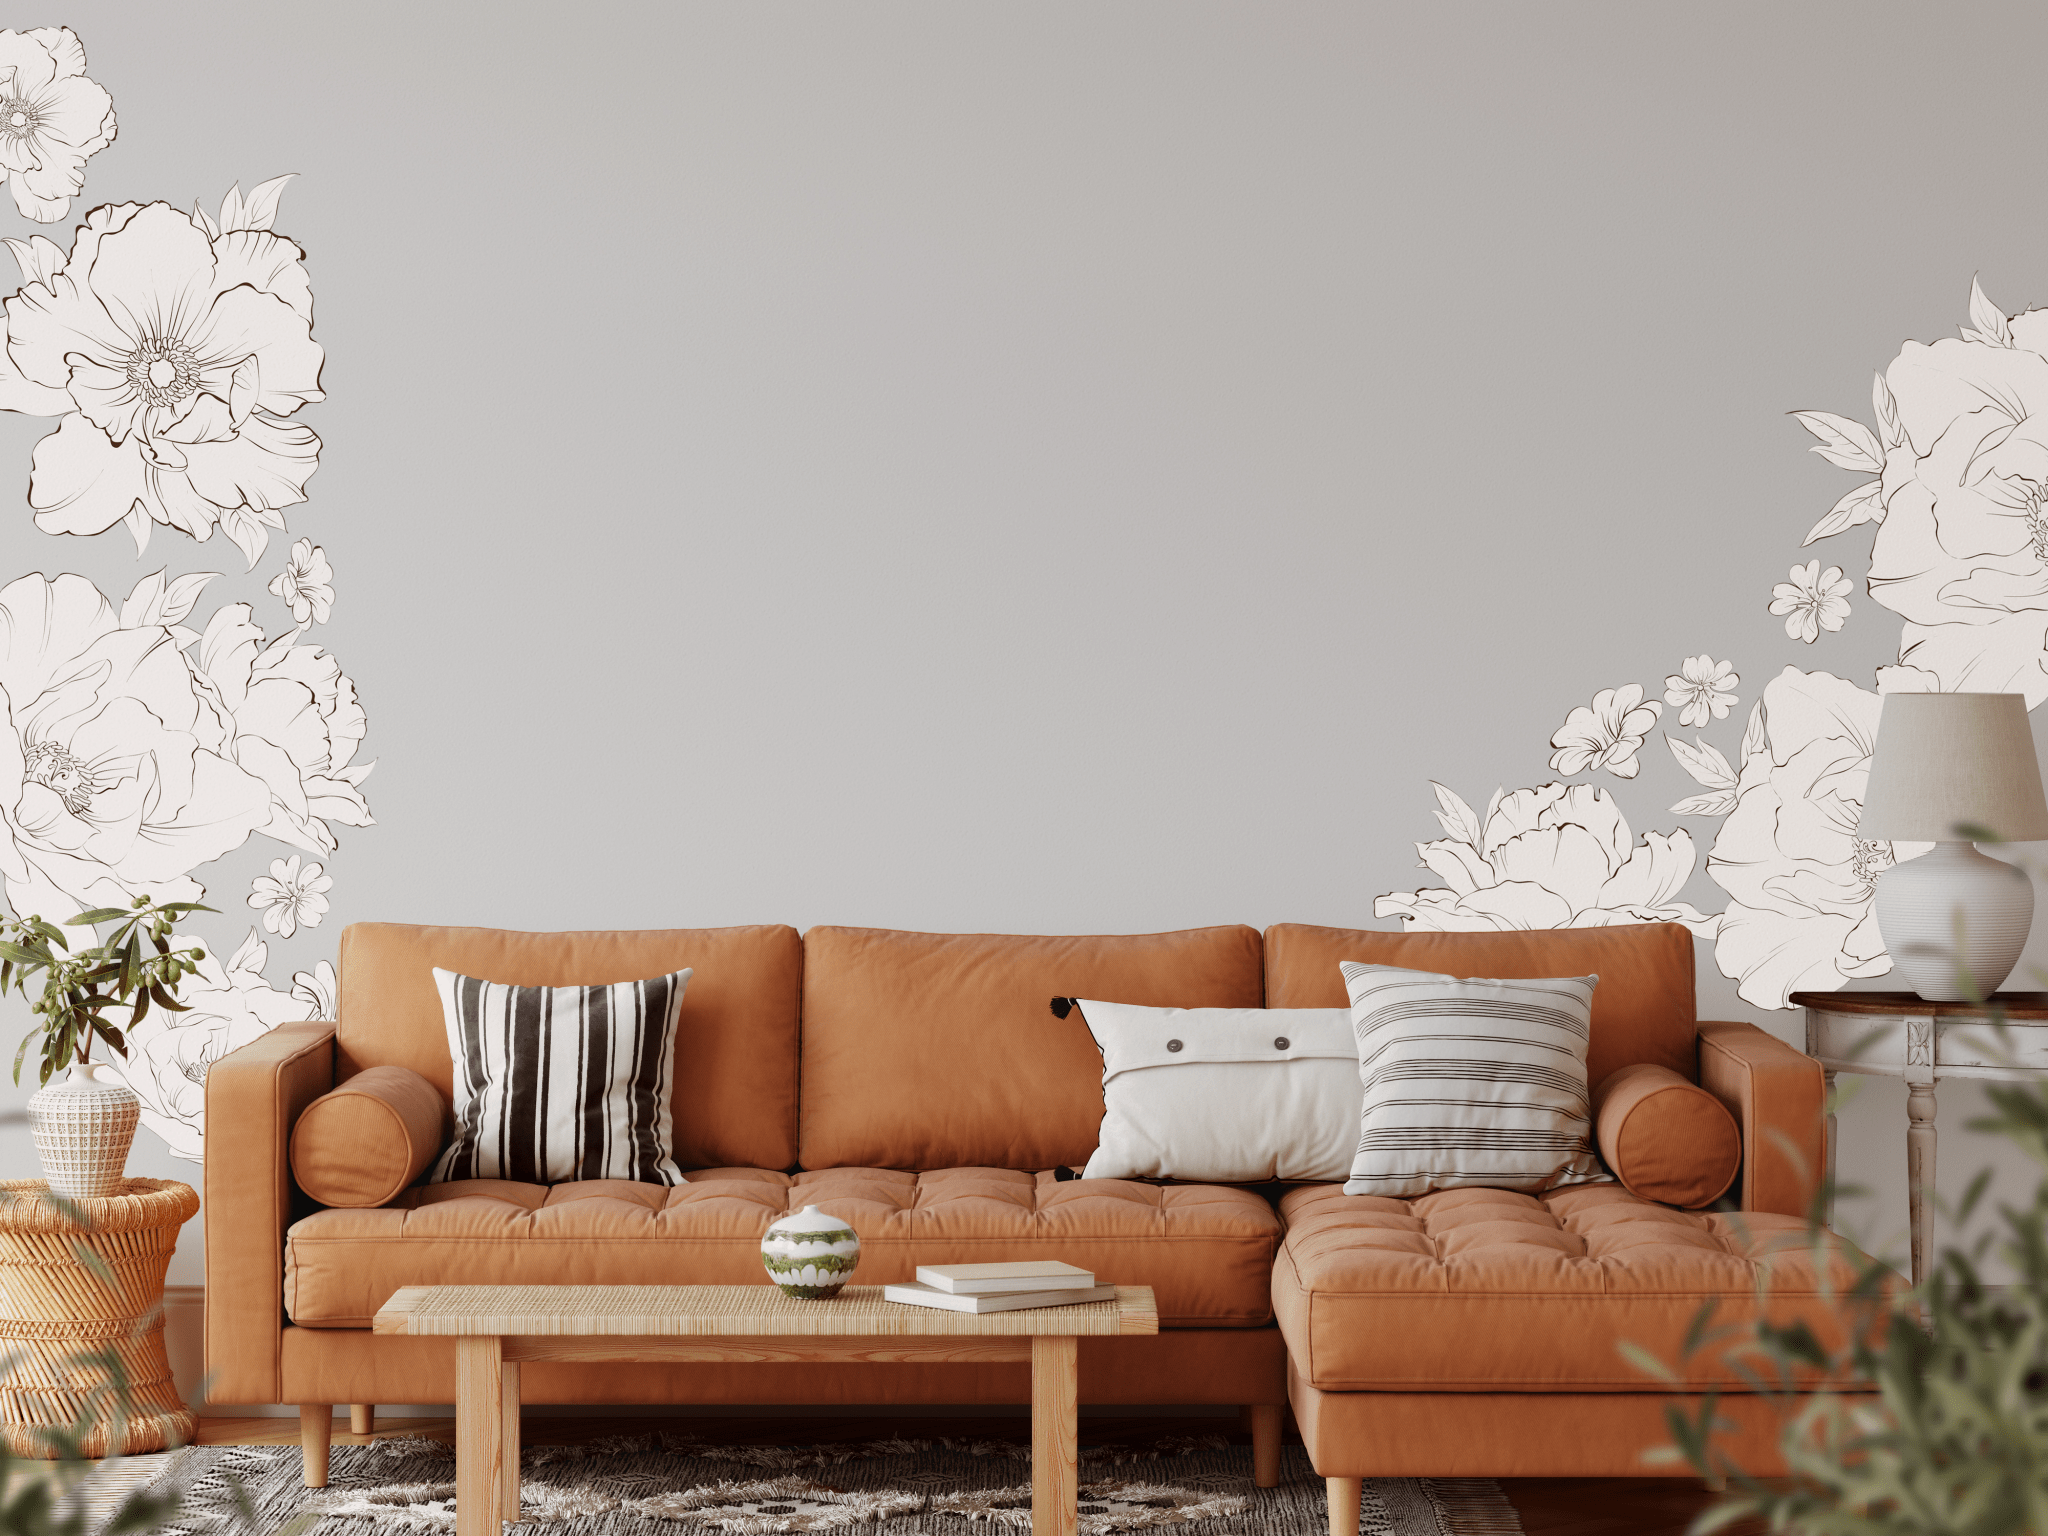 Living room with boho-style decor featuring large, detailed peony wall decals in soft, neutral tones. The decals frame a brown leather sectional, adding a touch of elegance to the cozy space